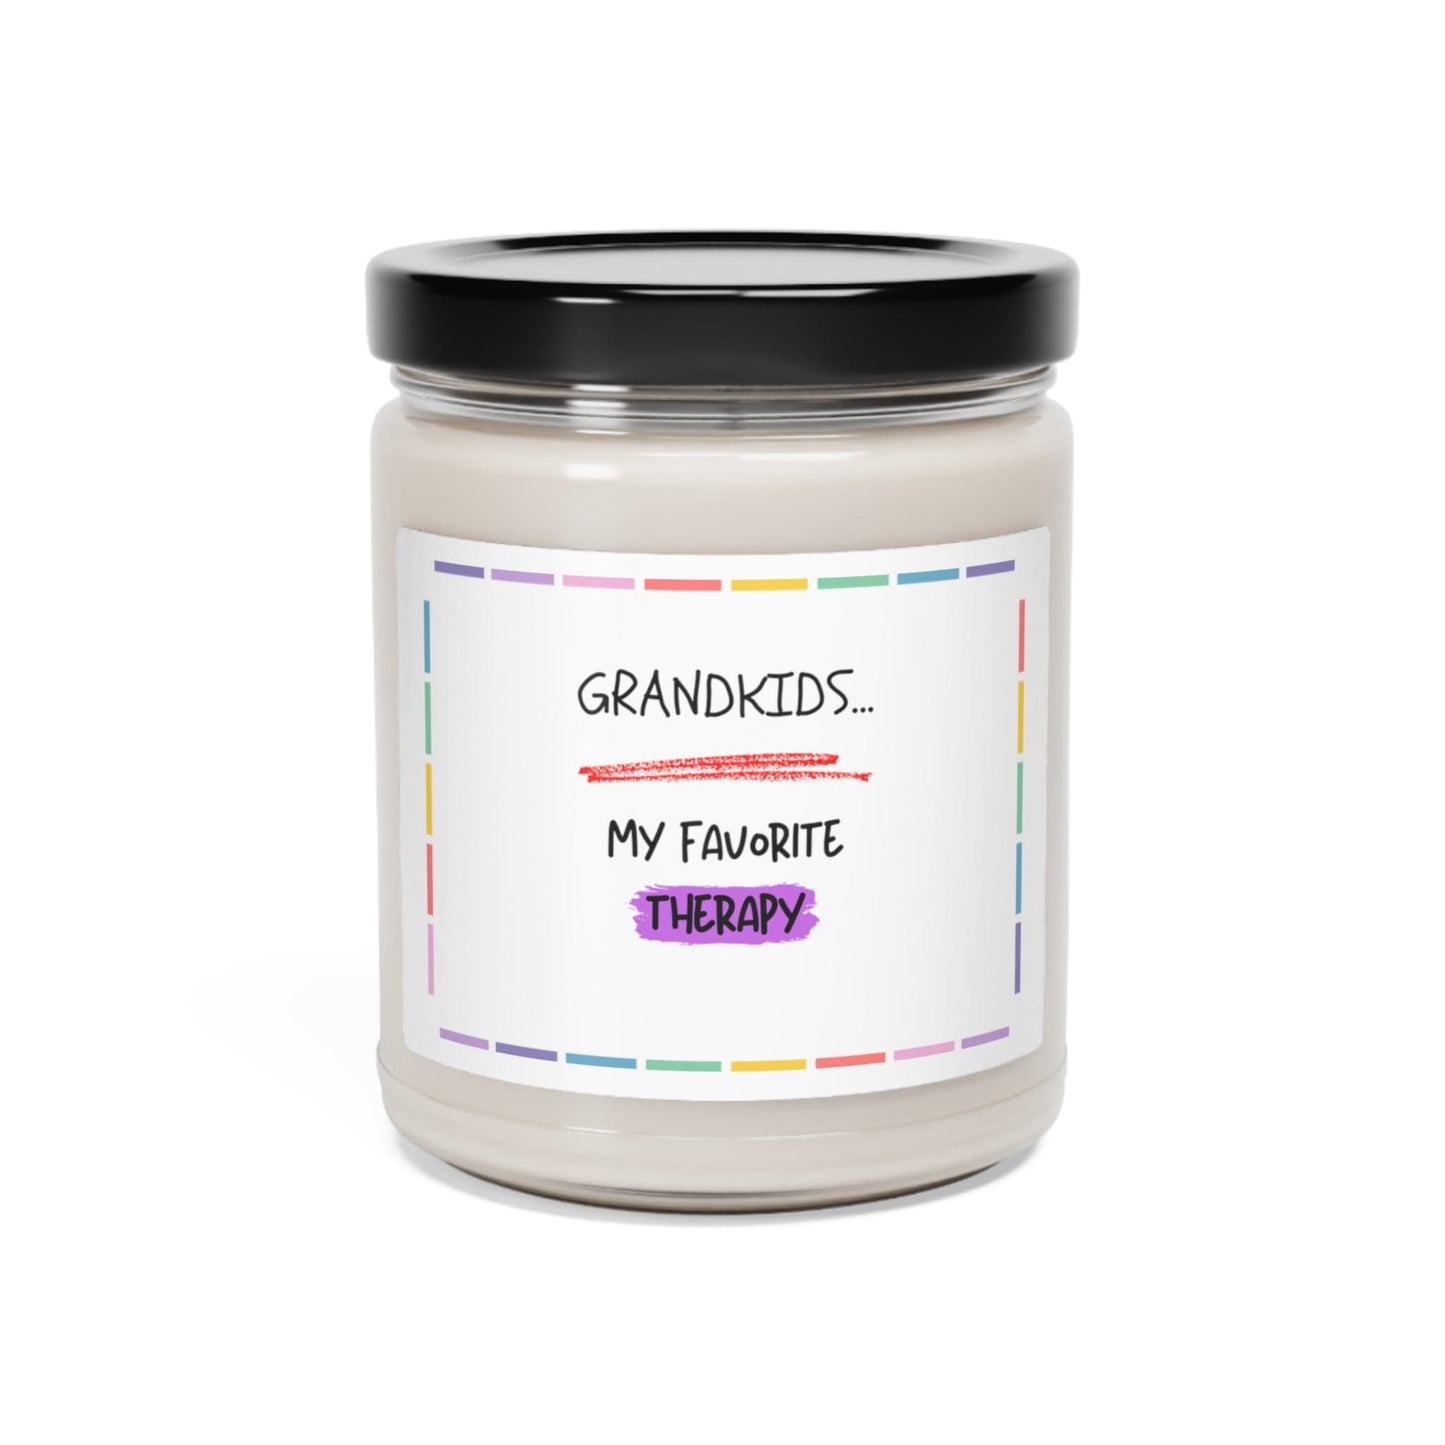 Grandkids ... My Favorite Therapy Scented Soy Candle, 9oz